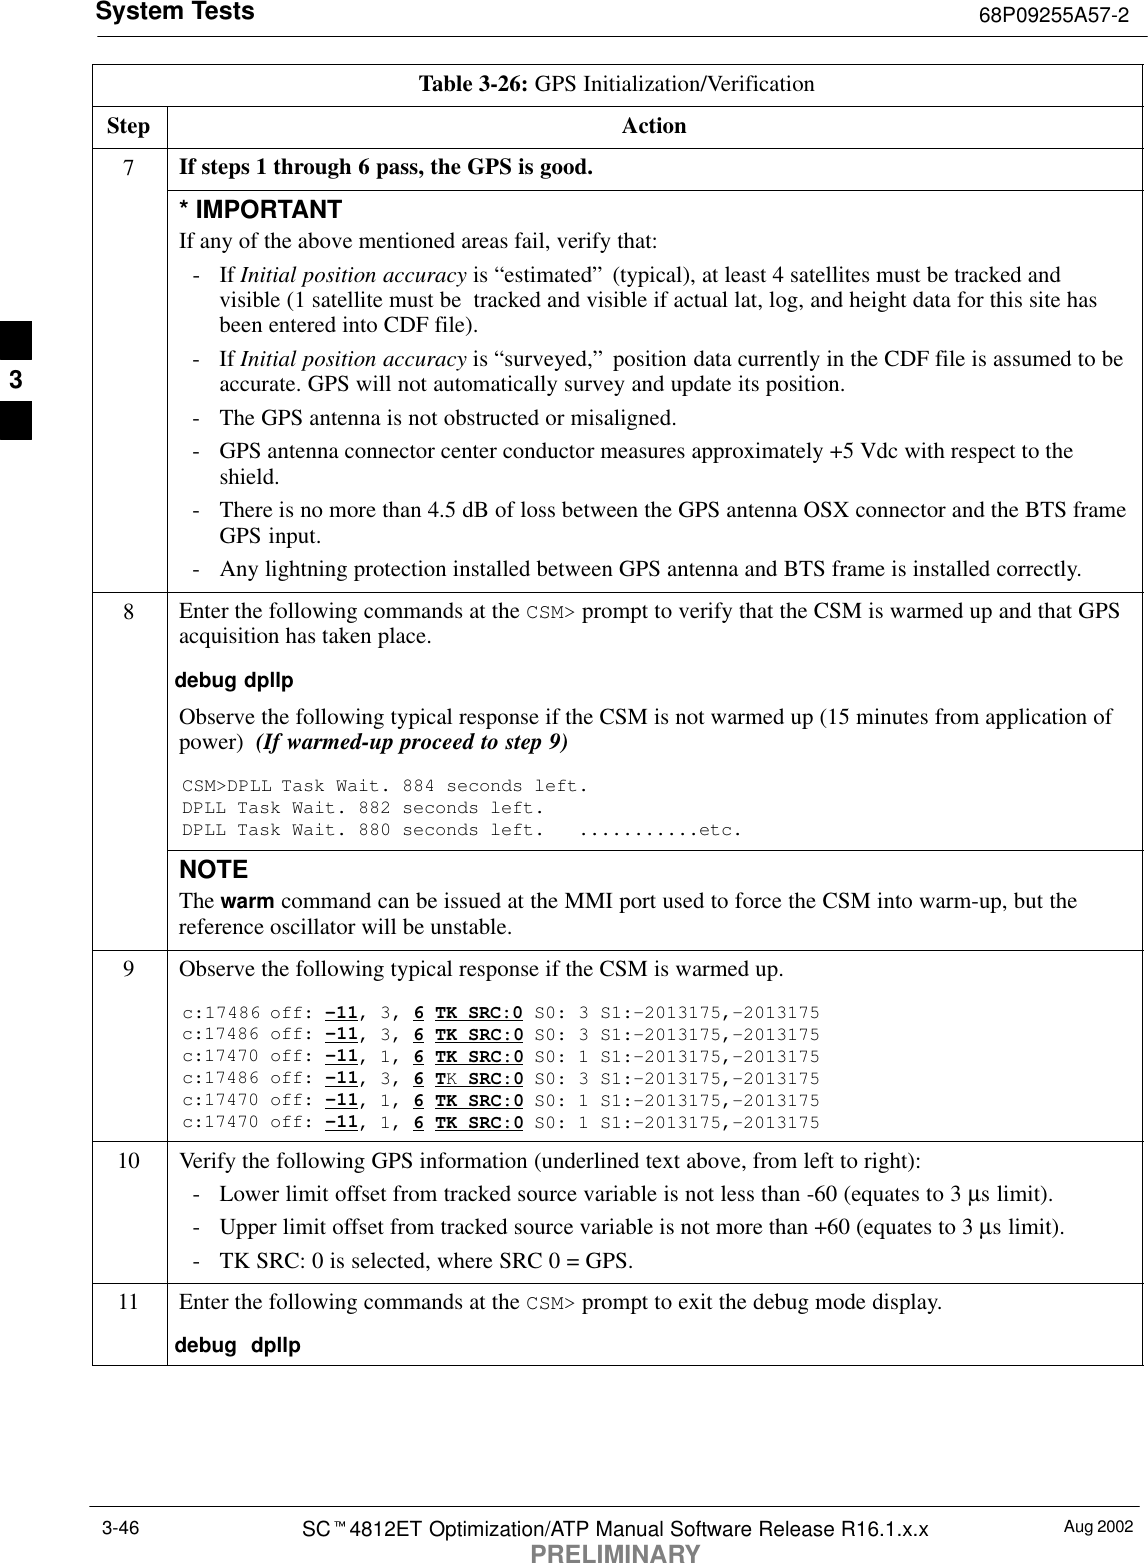 System Tests 68P09255A57-2Aug 2002SCt4812ET Optimization/ATP Manual Software Release R16.1.x.xPRELIMINARY3-46Table 3-26: GPS Initialization/VerificationStep Action7If steps 1 through 6 pass, the GPS is good.* IMPORTANTIf any of the above mentioned areas fail, verify that:- If Initial position accuracy is “estimated” (typical), at least 4 satellites must be tracked andvisible (1 satellite must be  tracked and visible if actual lat, log, and height data for this site hasbeen entered into CDF file).- If Initial position accuracy is “surveyed,” position data currently in the CDF file is assumed to beaccurate. GPS will not automatically survey and update its position.- The GPS antenna is not obstructed or misaligned.- GPS antenna connector center conductor measures approximately +5 Vdc with respect to theshield.- There is no more than 4.5 dB of loss between the GPS antenna OSX connector and the BTS frameGPS input.- Any lightning protection installed between GPS antenna and BTS frame is installed correctly.8Enter the following commands at the CSM&gt; prompt to verify that the CSM is warmed up and that GPSacquisition has taken place.debug dpllp Observe the following typical response if the CSM is not warmed up (15 minutes from application ofpower)  (If warmed-up proceed to step 9)CSM&gt;DPLL Task Wait. 884 seconds left.DPLL Task Wait. 882 seconds left.DPLL Task Wait. 880 seconds left.   ...........etc.NOTEThe warm command can be issued at the MMI port used to force the CSM into warm-up, but thereference oscillator will be unstable.9Observe the following typical response if the CSM is warmed up.c:17486 off: -11, 3, 6 TK SRC:0 S0: 3 S1:-2013175,-2013175c:17486 off: -11, 3, 6 TK SRC:0 S0: 3 S1:-2013175,-2013175c:17470 off: -11, 1, 6 TK SRC:0 S0: 1 S1:-2013175,-2013175c:17486 off: -11, 3, 6 TK SRC:0 S0: 3 S1:-2013175,-2013175c:17470 off: -11, 1, 6 TK SRC:0 S0: 1 S1:-2013175,-2013175c:17470 off: -11, 1, 6 TK SRC:0 S0: 1 S1:-2013175,-201317510 Verify the following GPS information (underlined text above, from left to right):- Lower limit offset from tracked source variable is not less than -60 (equates to 3 µs limit).- Upper limit offset from tracked source variable is not more than +60 (equates to 3 µs limit).- TK SRC: 0 is selected, where SRC 0 = GPS.11 Enter the following commands at the CSM&gt; prompt to exit the debug mode display.debug  dpllp 3